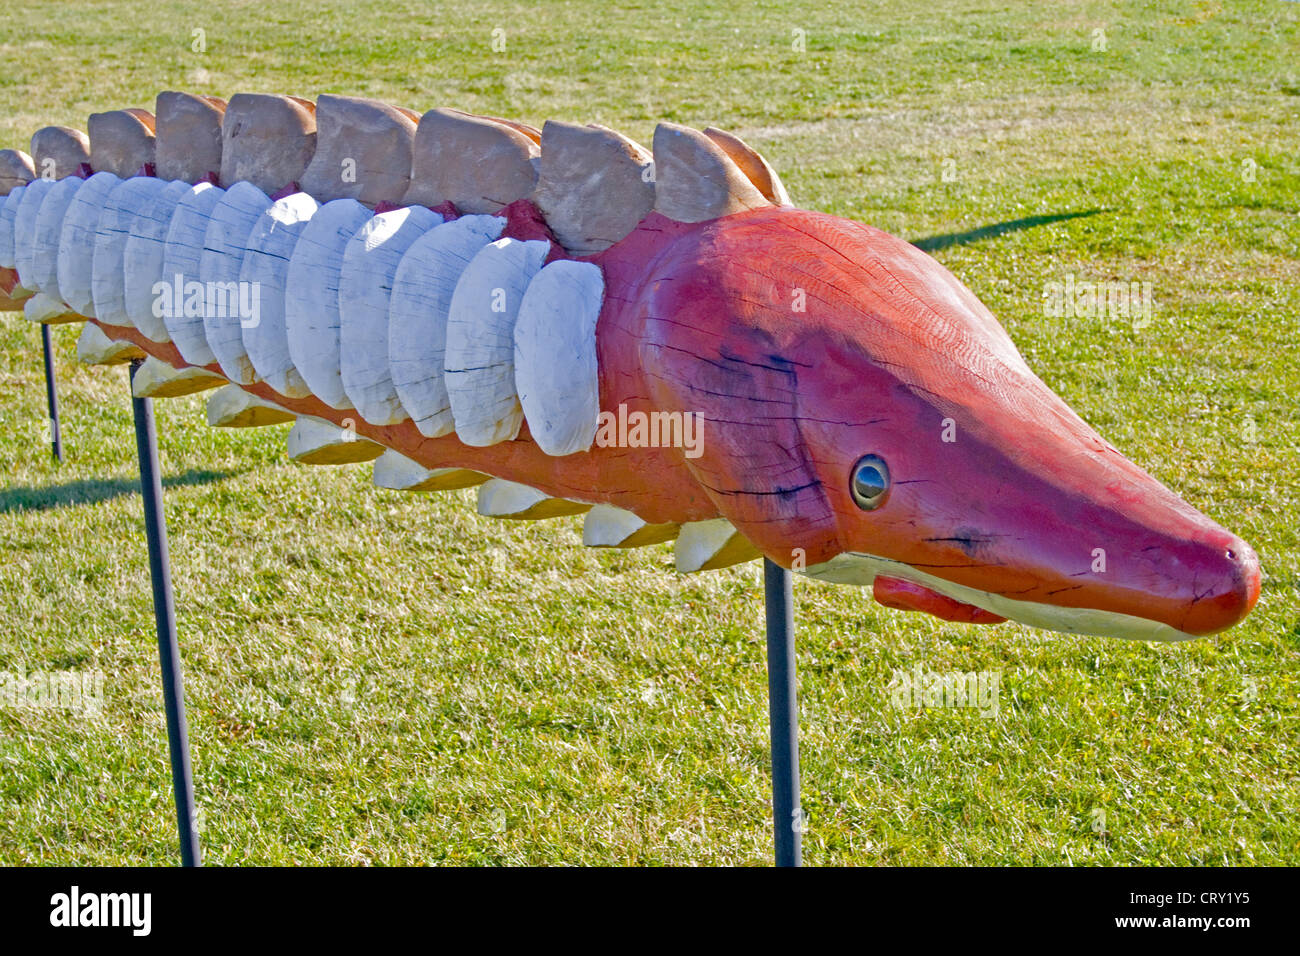 Sturgeon by Robert Ressler, exhibited in an outside art gallery. Franconia Sculpture Park Franconia Minnesota MN USA Stock Photo